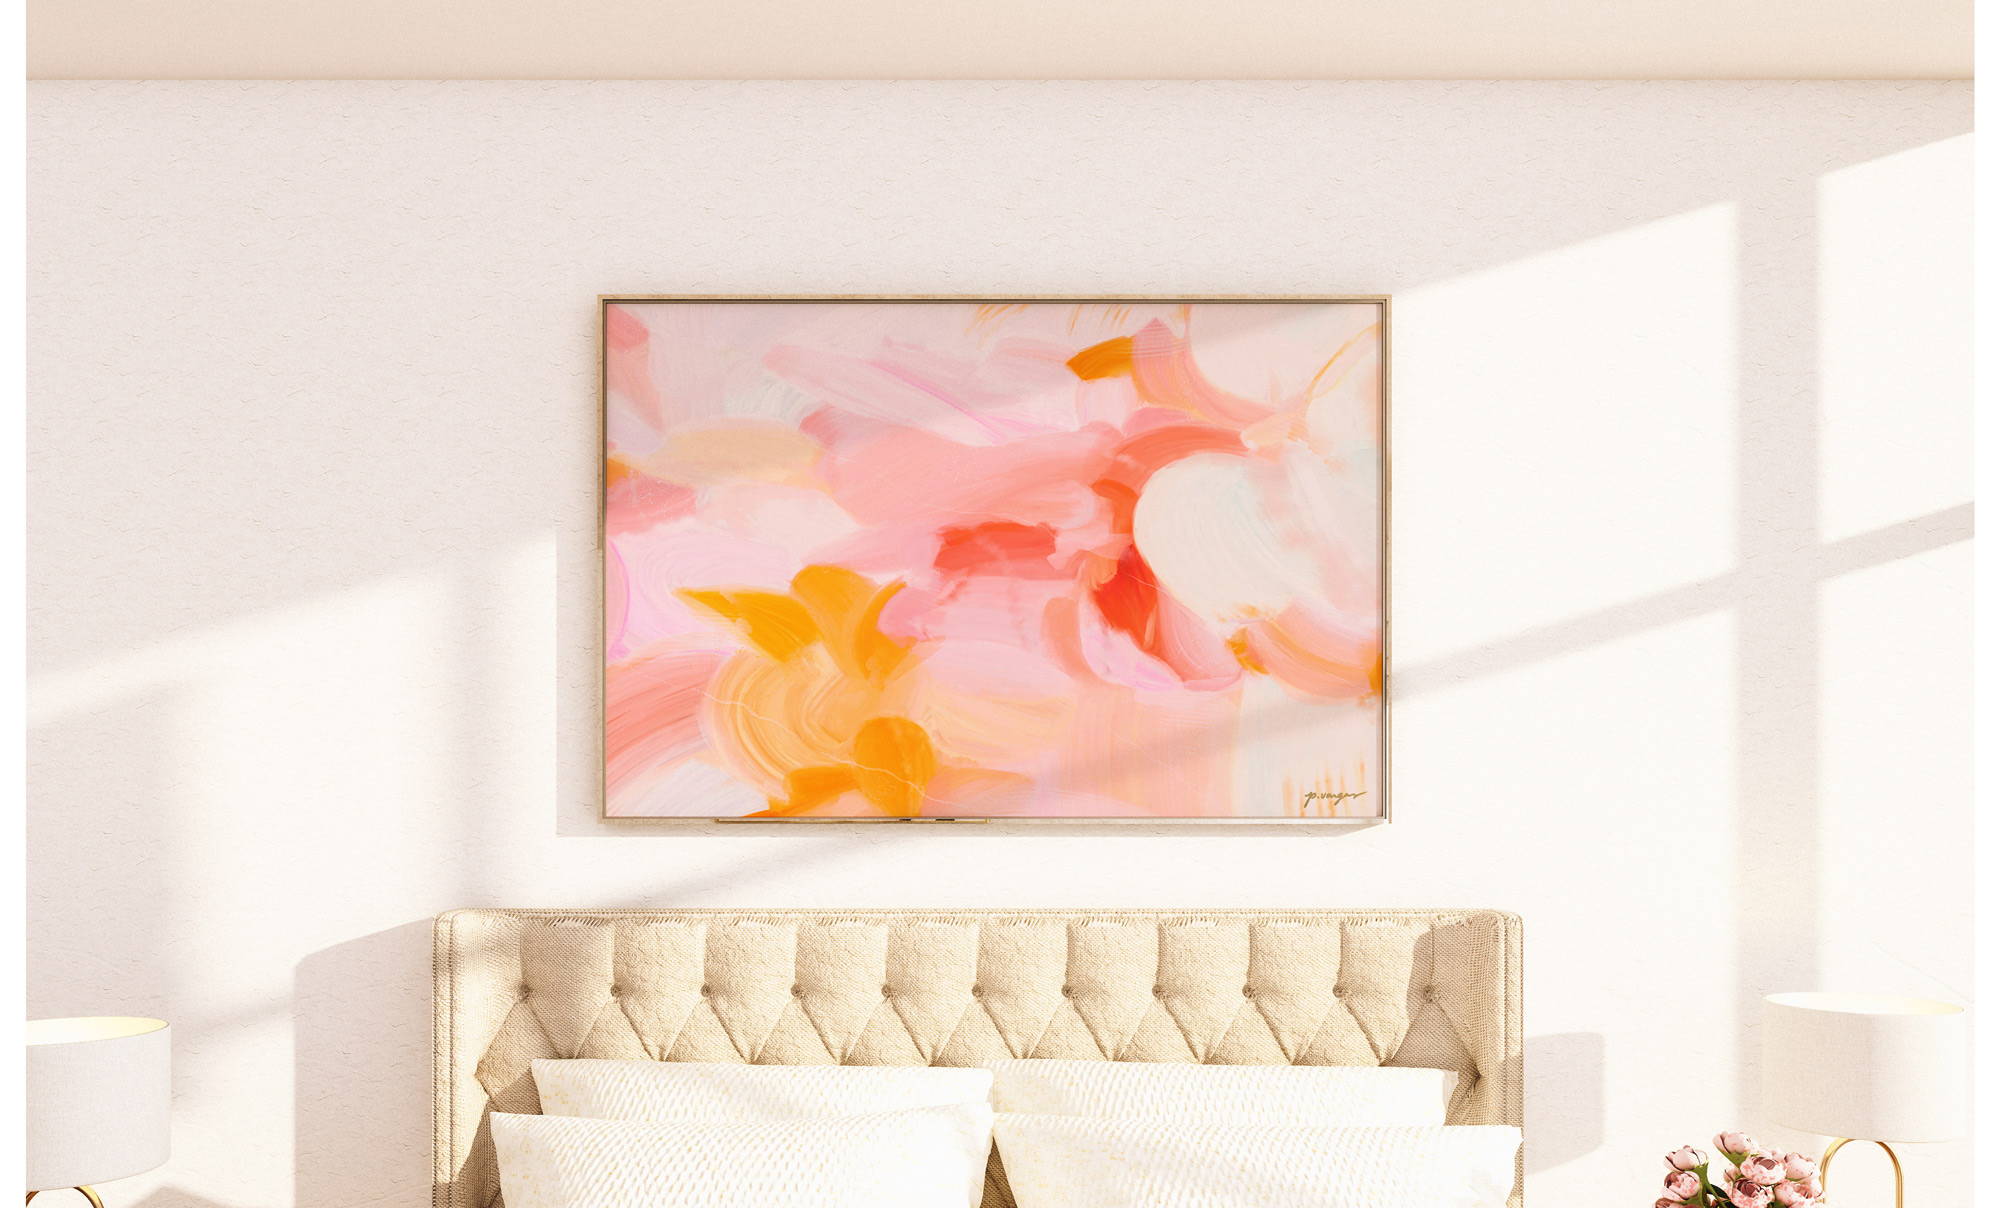 Oversized pink and yellow art over the bed